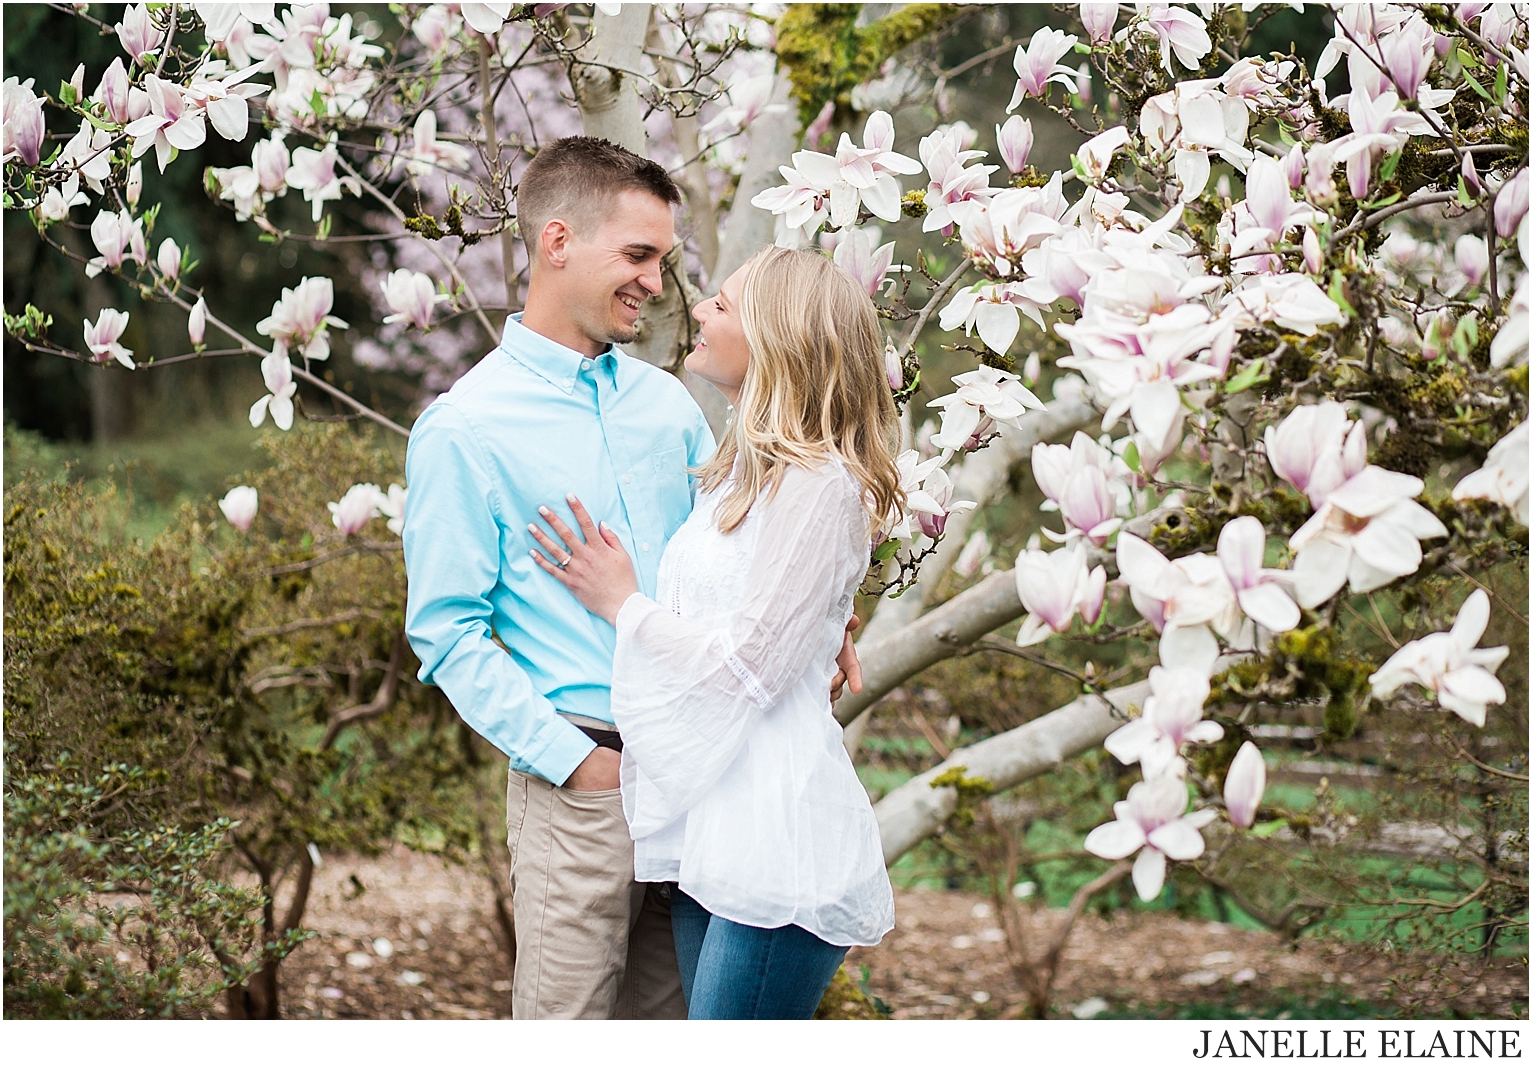 tricia and nate engagement photos-janelle elaine photography-150.jpg